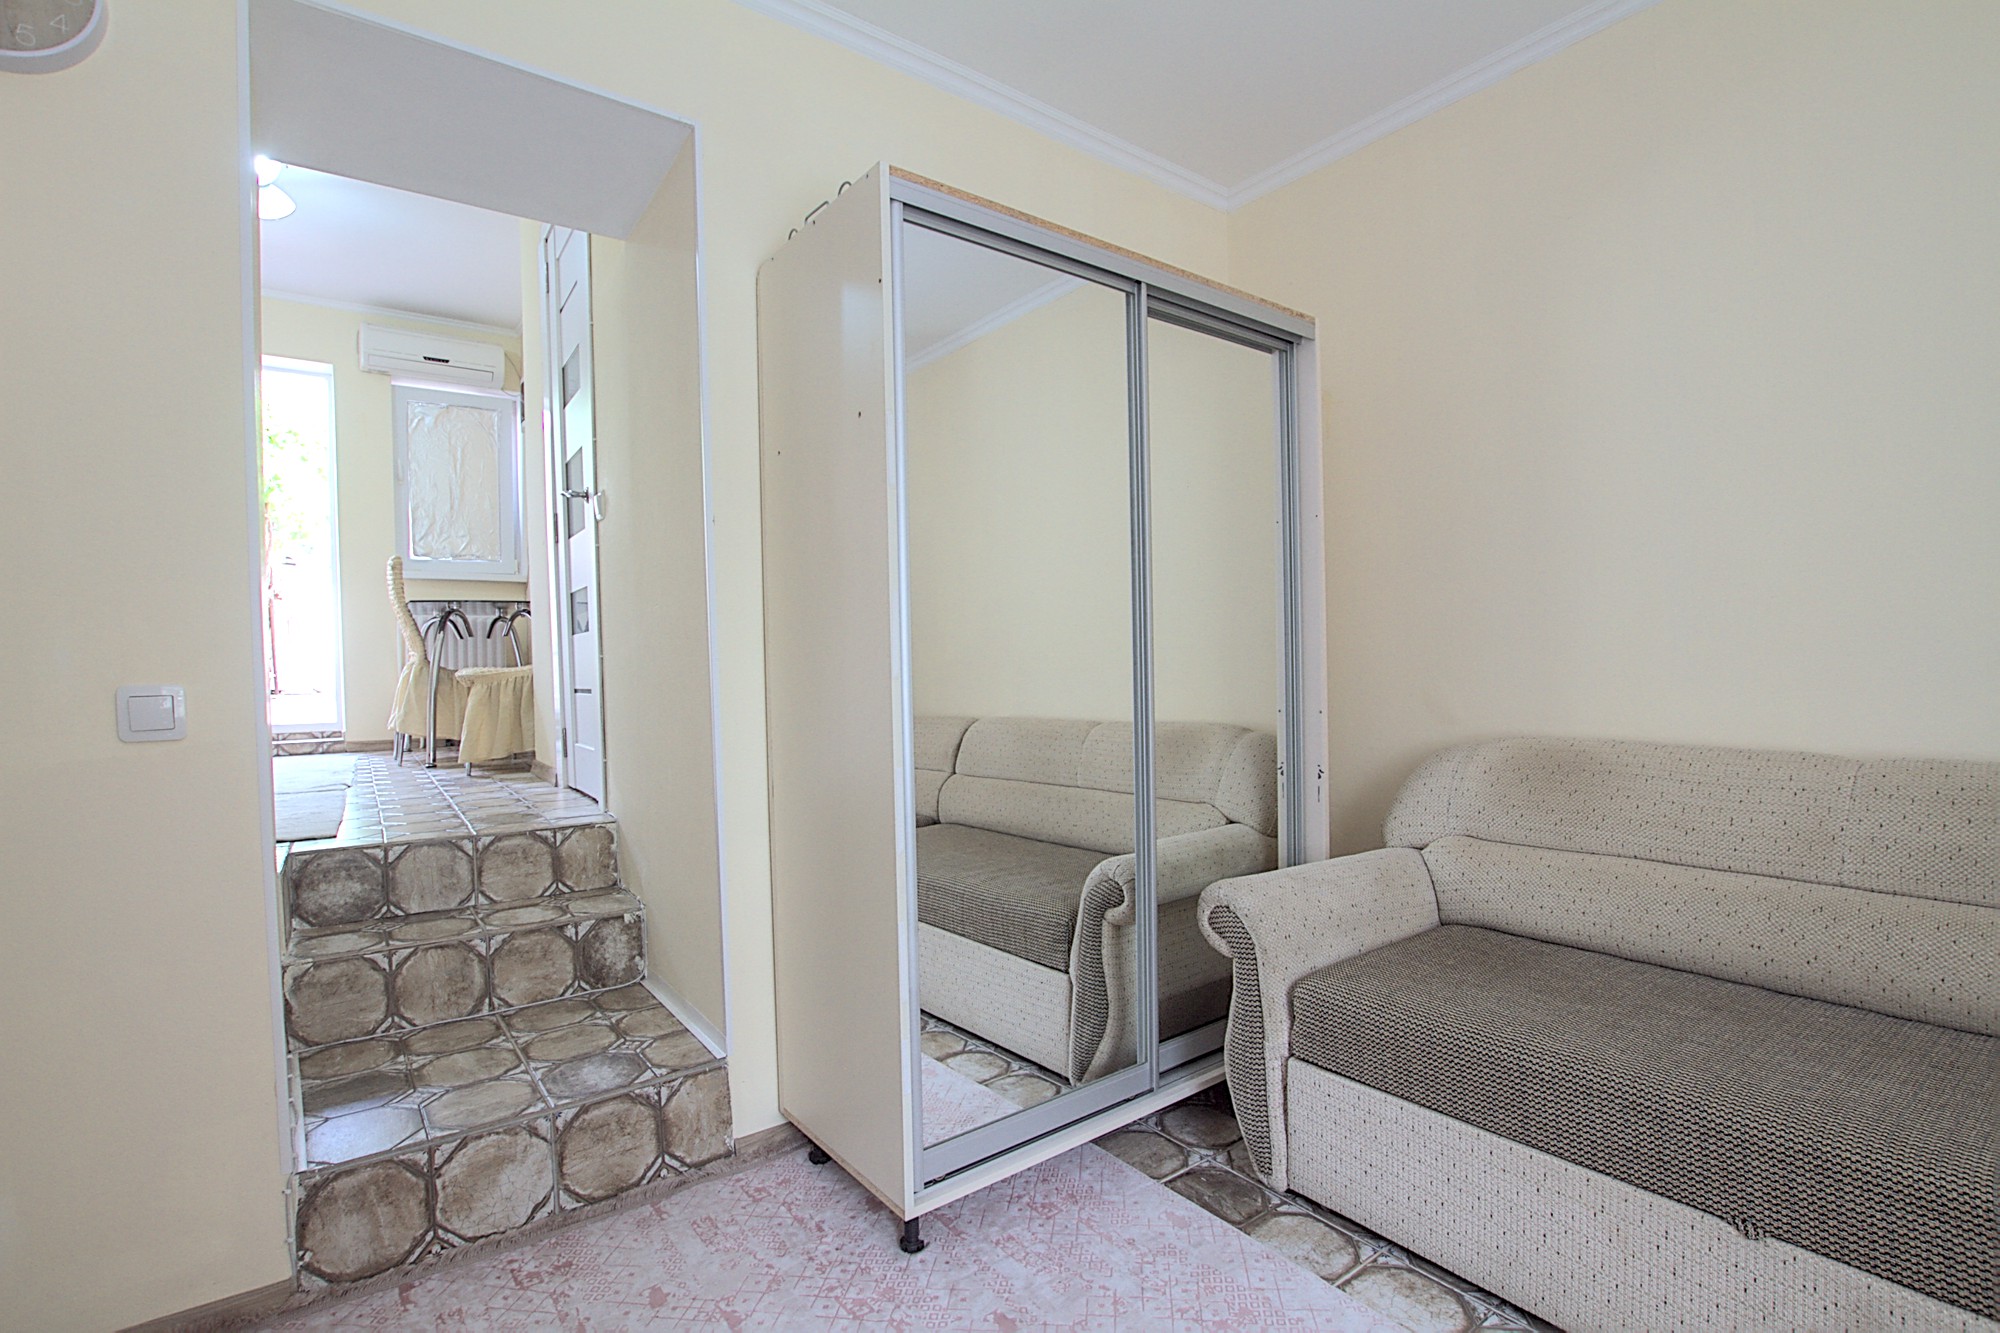 Room for rent in Chisinau city center: 1 room, 1 bedroom, 19 m²